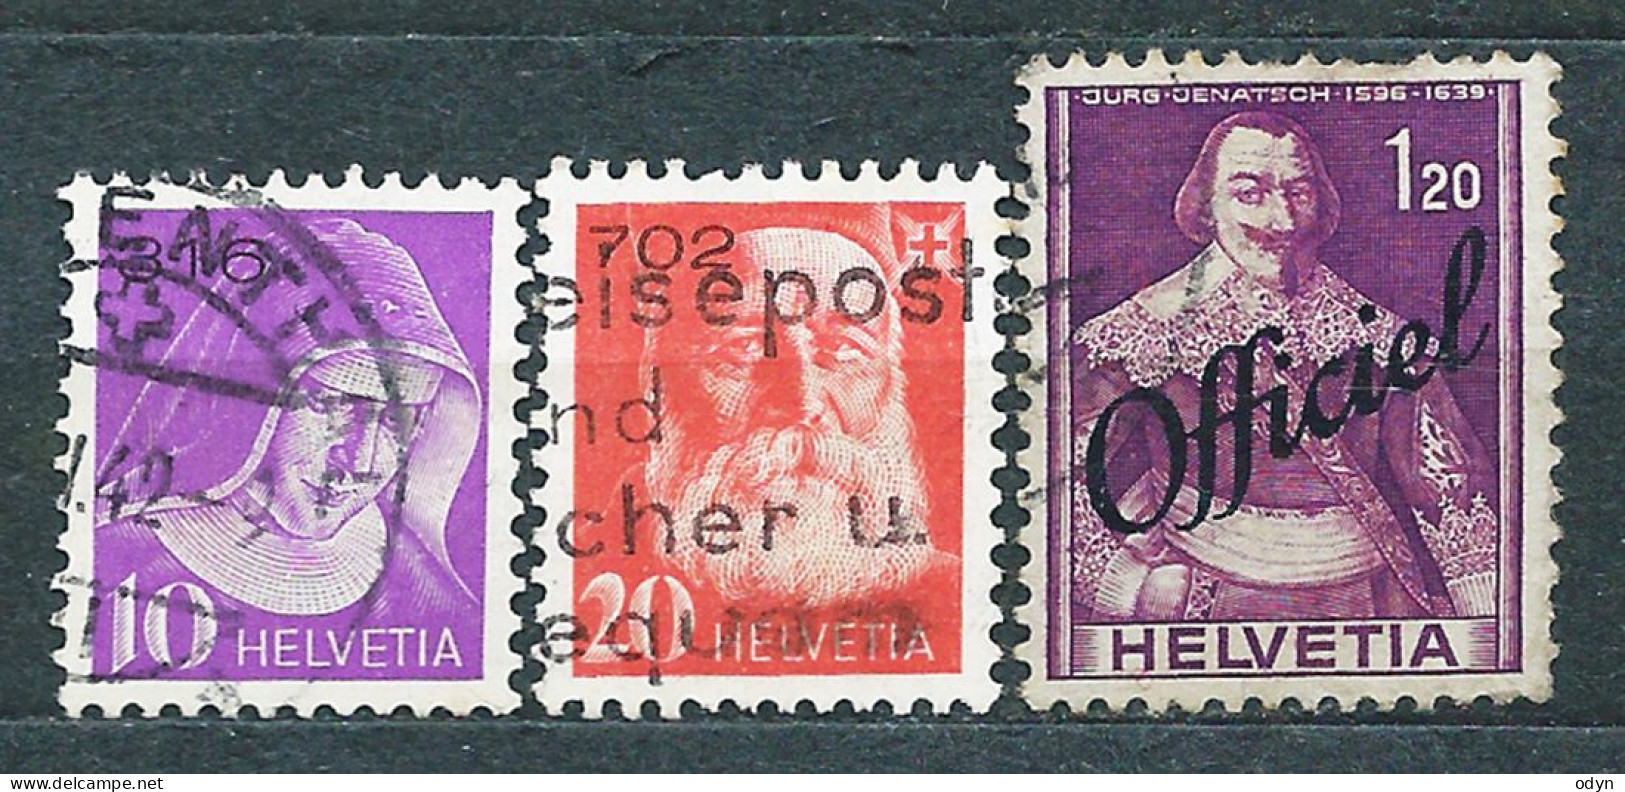 Switzerland, 1878-1938, Lot Of 42 Postal Due Stamps From Sets MiNr 1-9, 2-5, 8-10, 15-16, 17-20, 29-37 32-36 42-49 54-61 - Postage Due